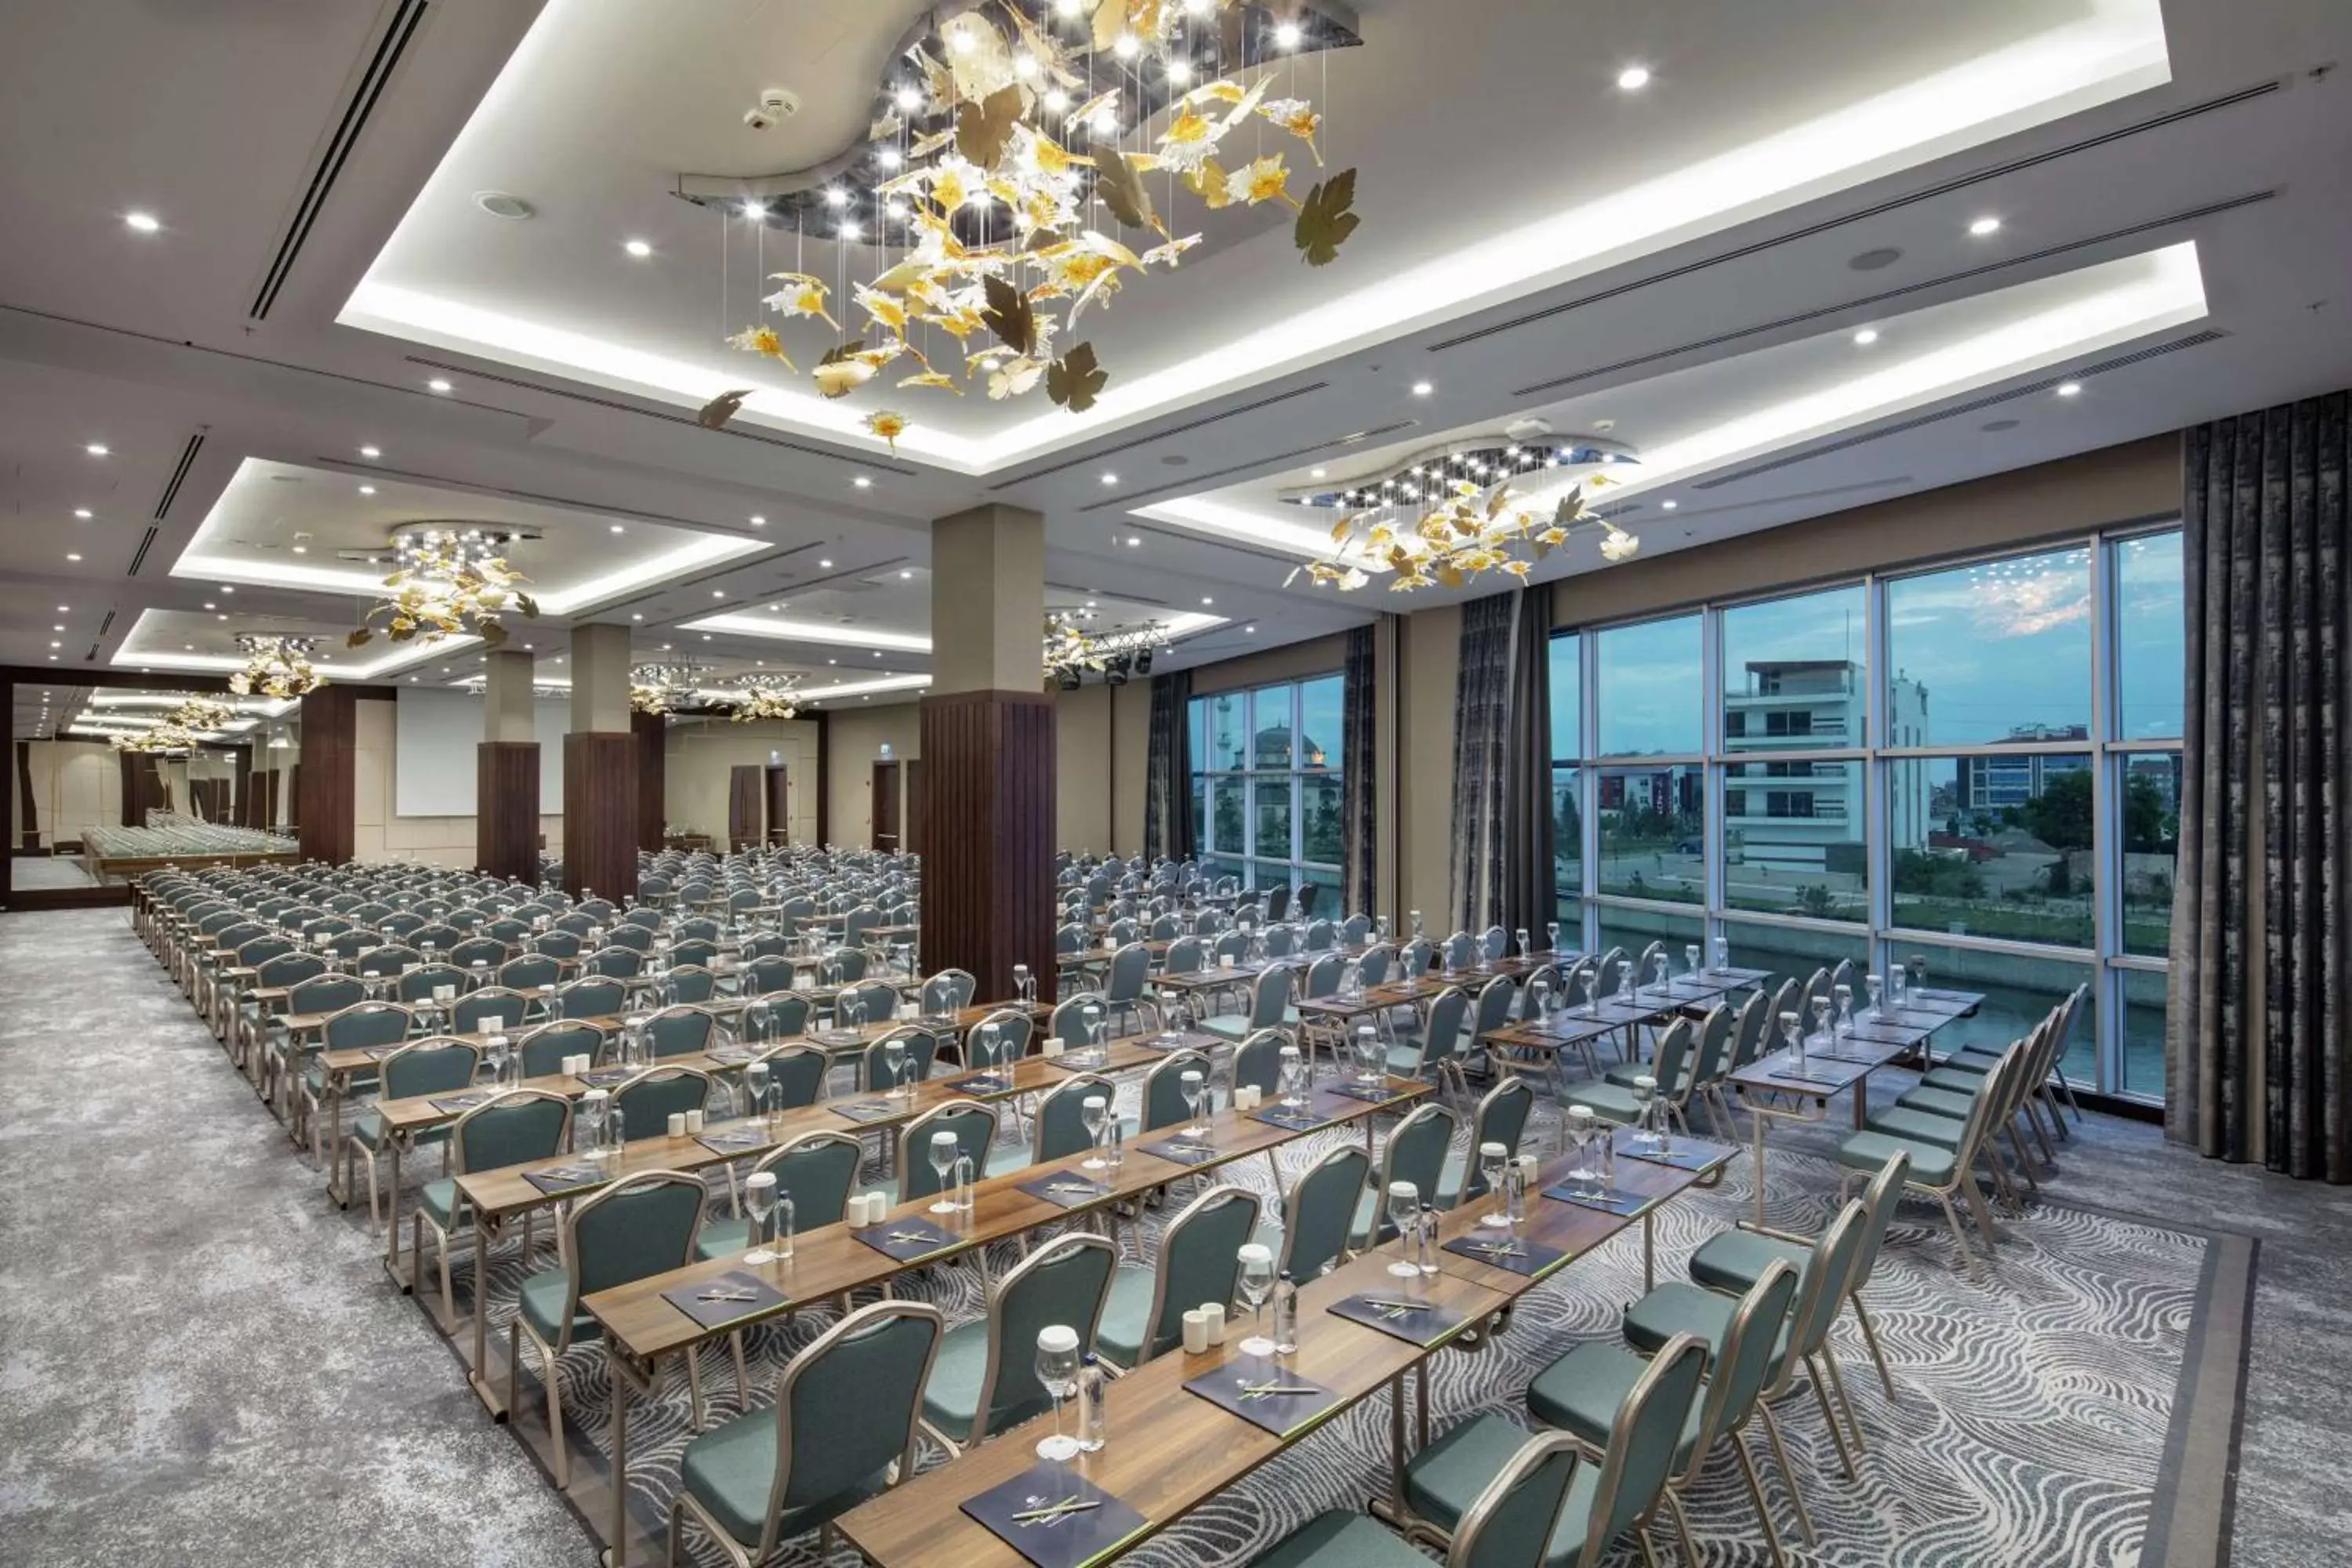 Meeting/conference room in Doubletree By Hilton Afyonkarahisar